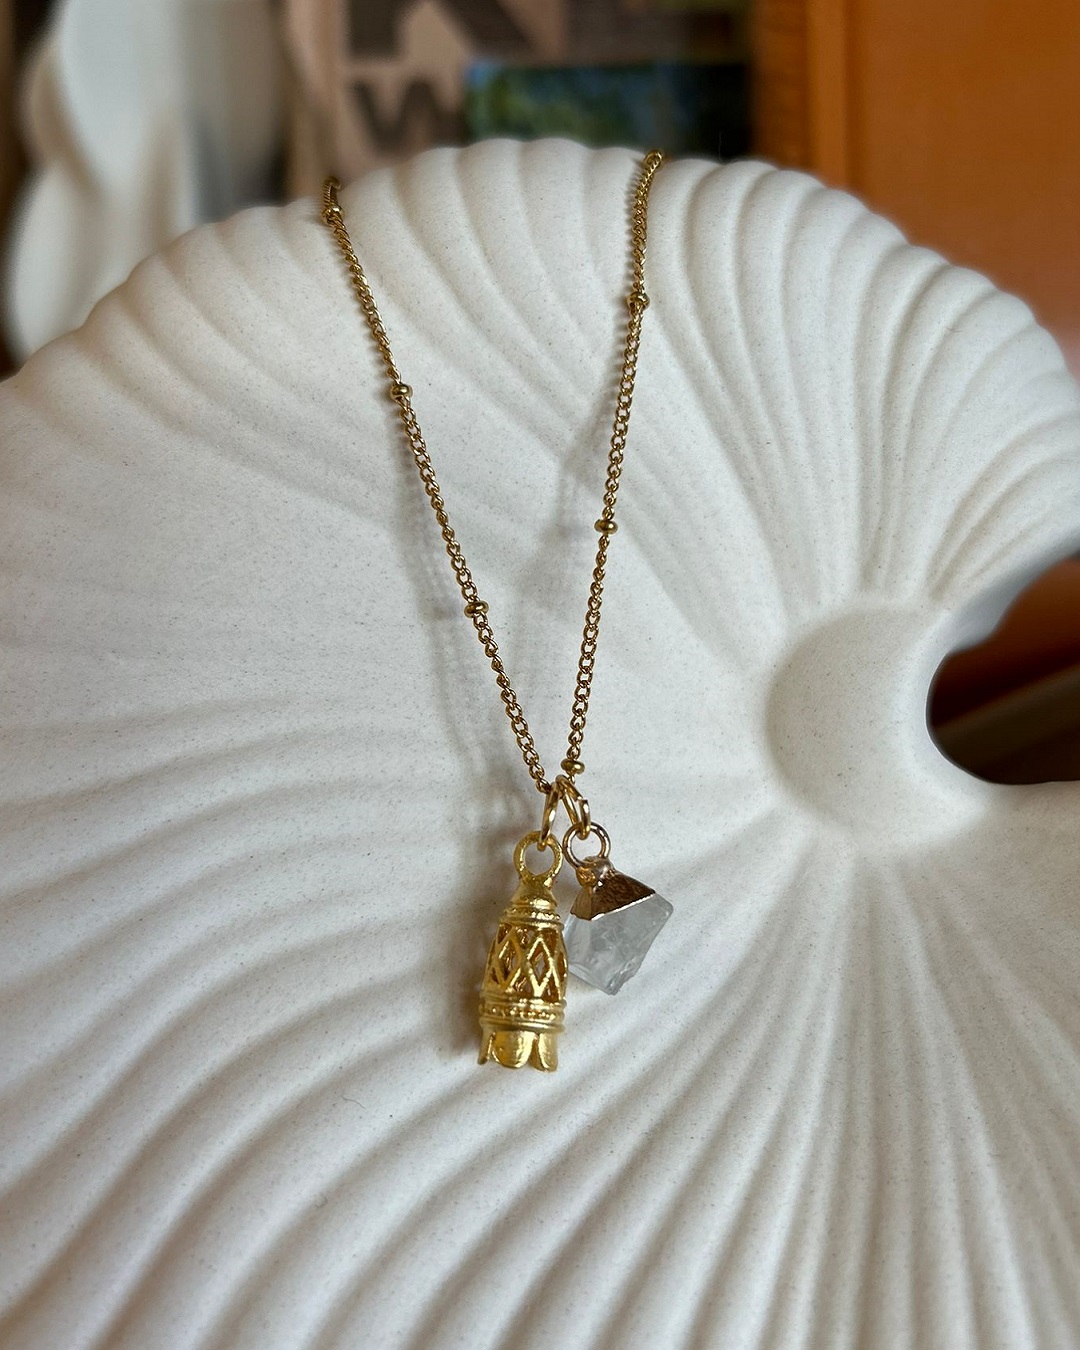 Icicle crystal and gold ottoman hanging on necklace